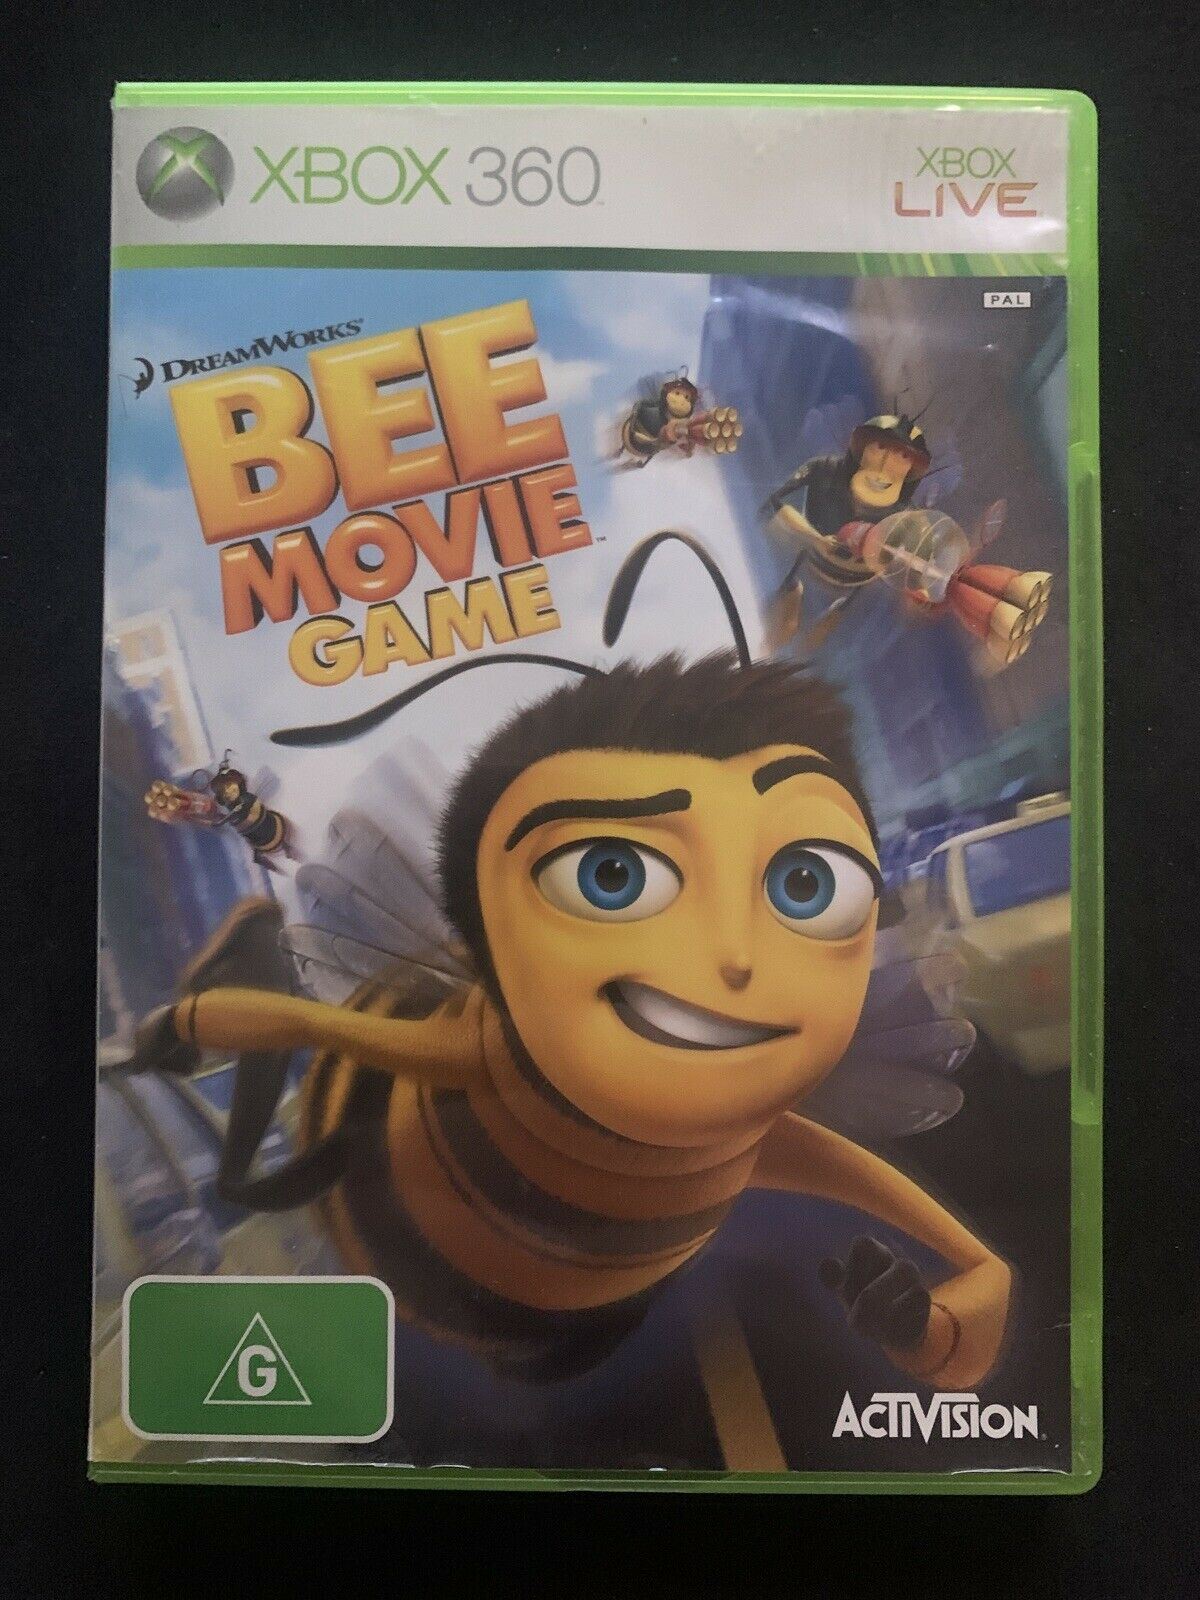 DreamWorks Bee Movie Game - Microsoft Xbox 360 PAL Game with Manual